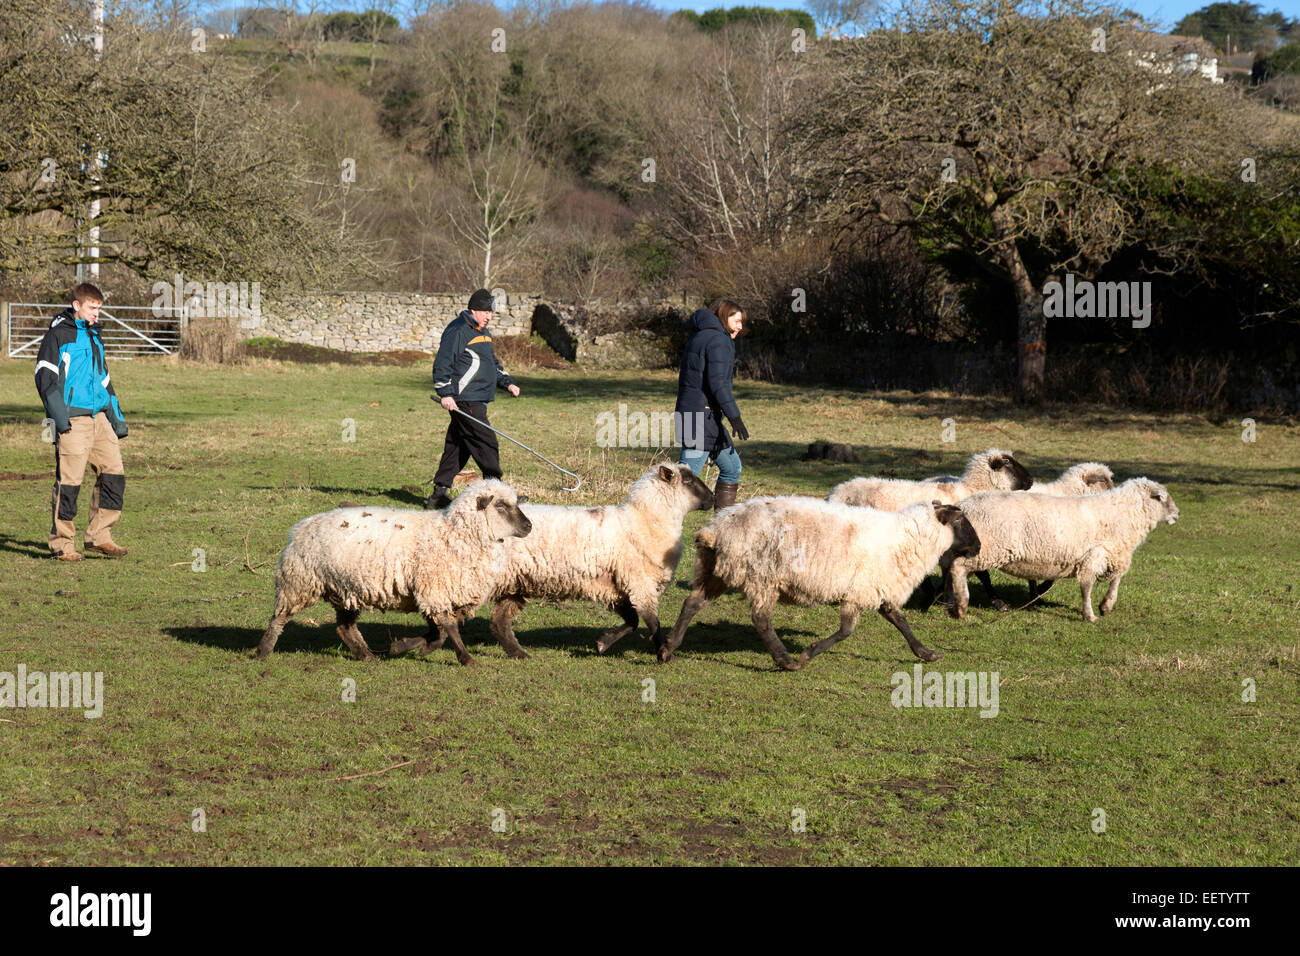 People including a shepherd with his crook herding sheep on a smallholding or farm, Bleadon village, Somerset England UK Stock Photo